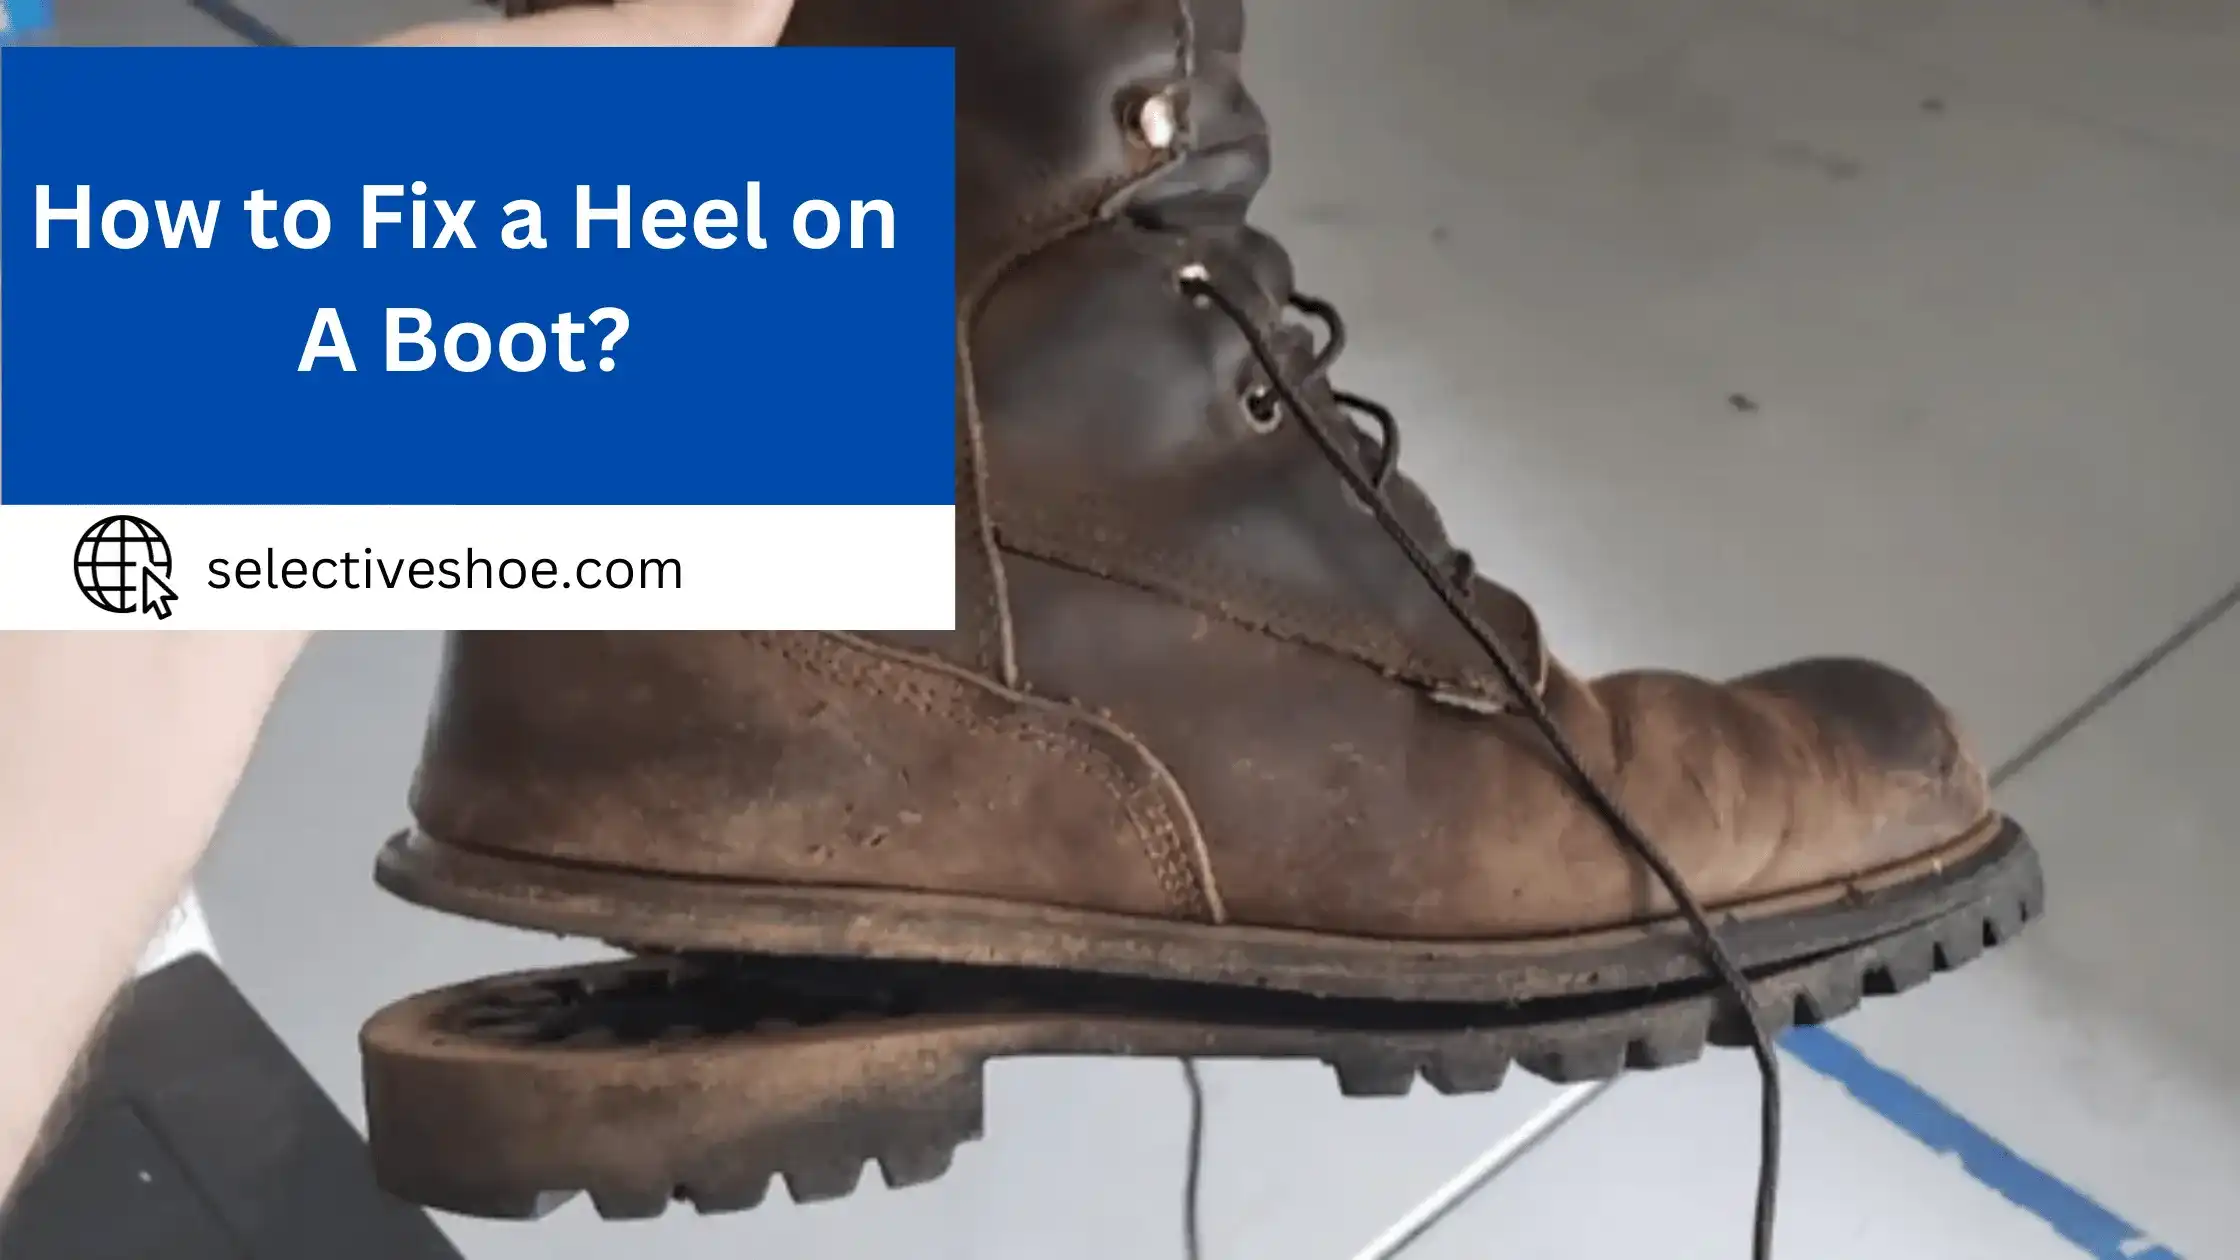 How to Fix a Heel on a Boot? Step By Step Guide